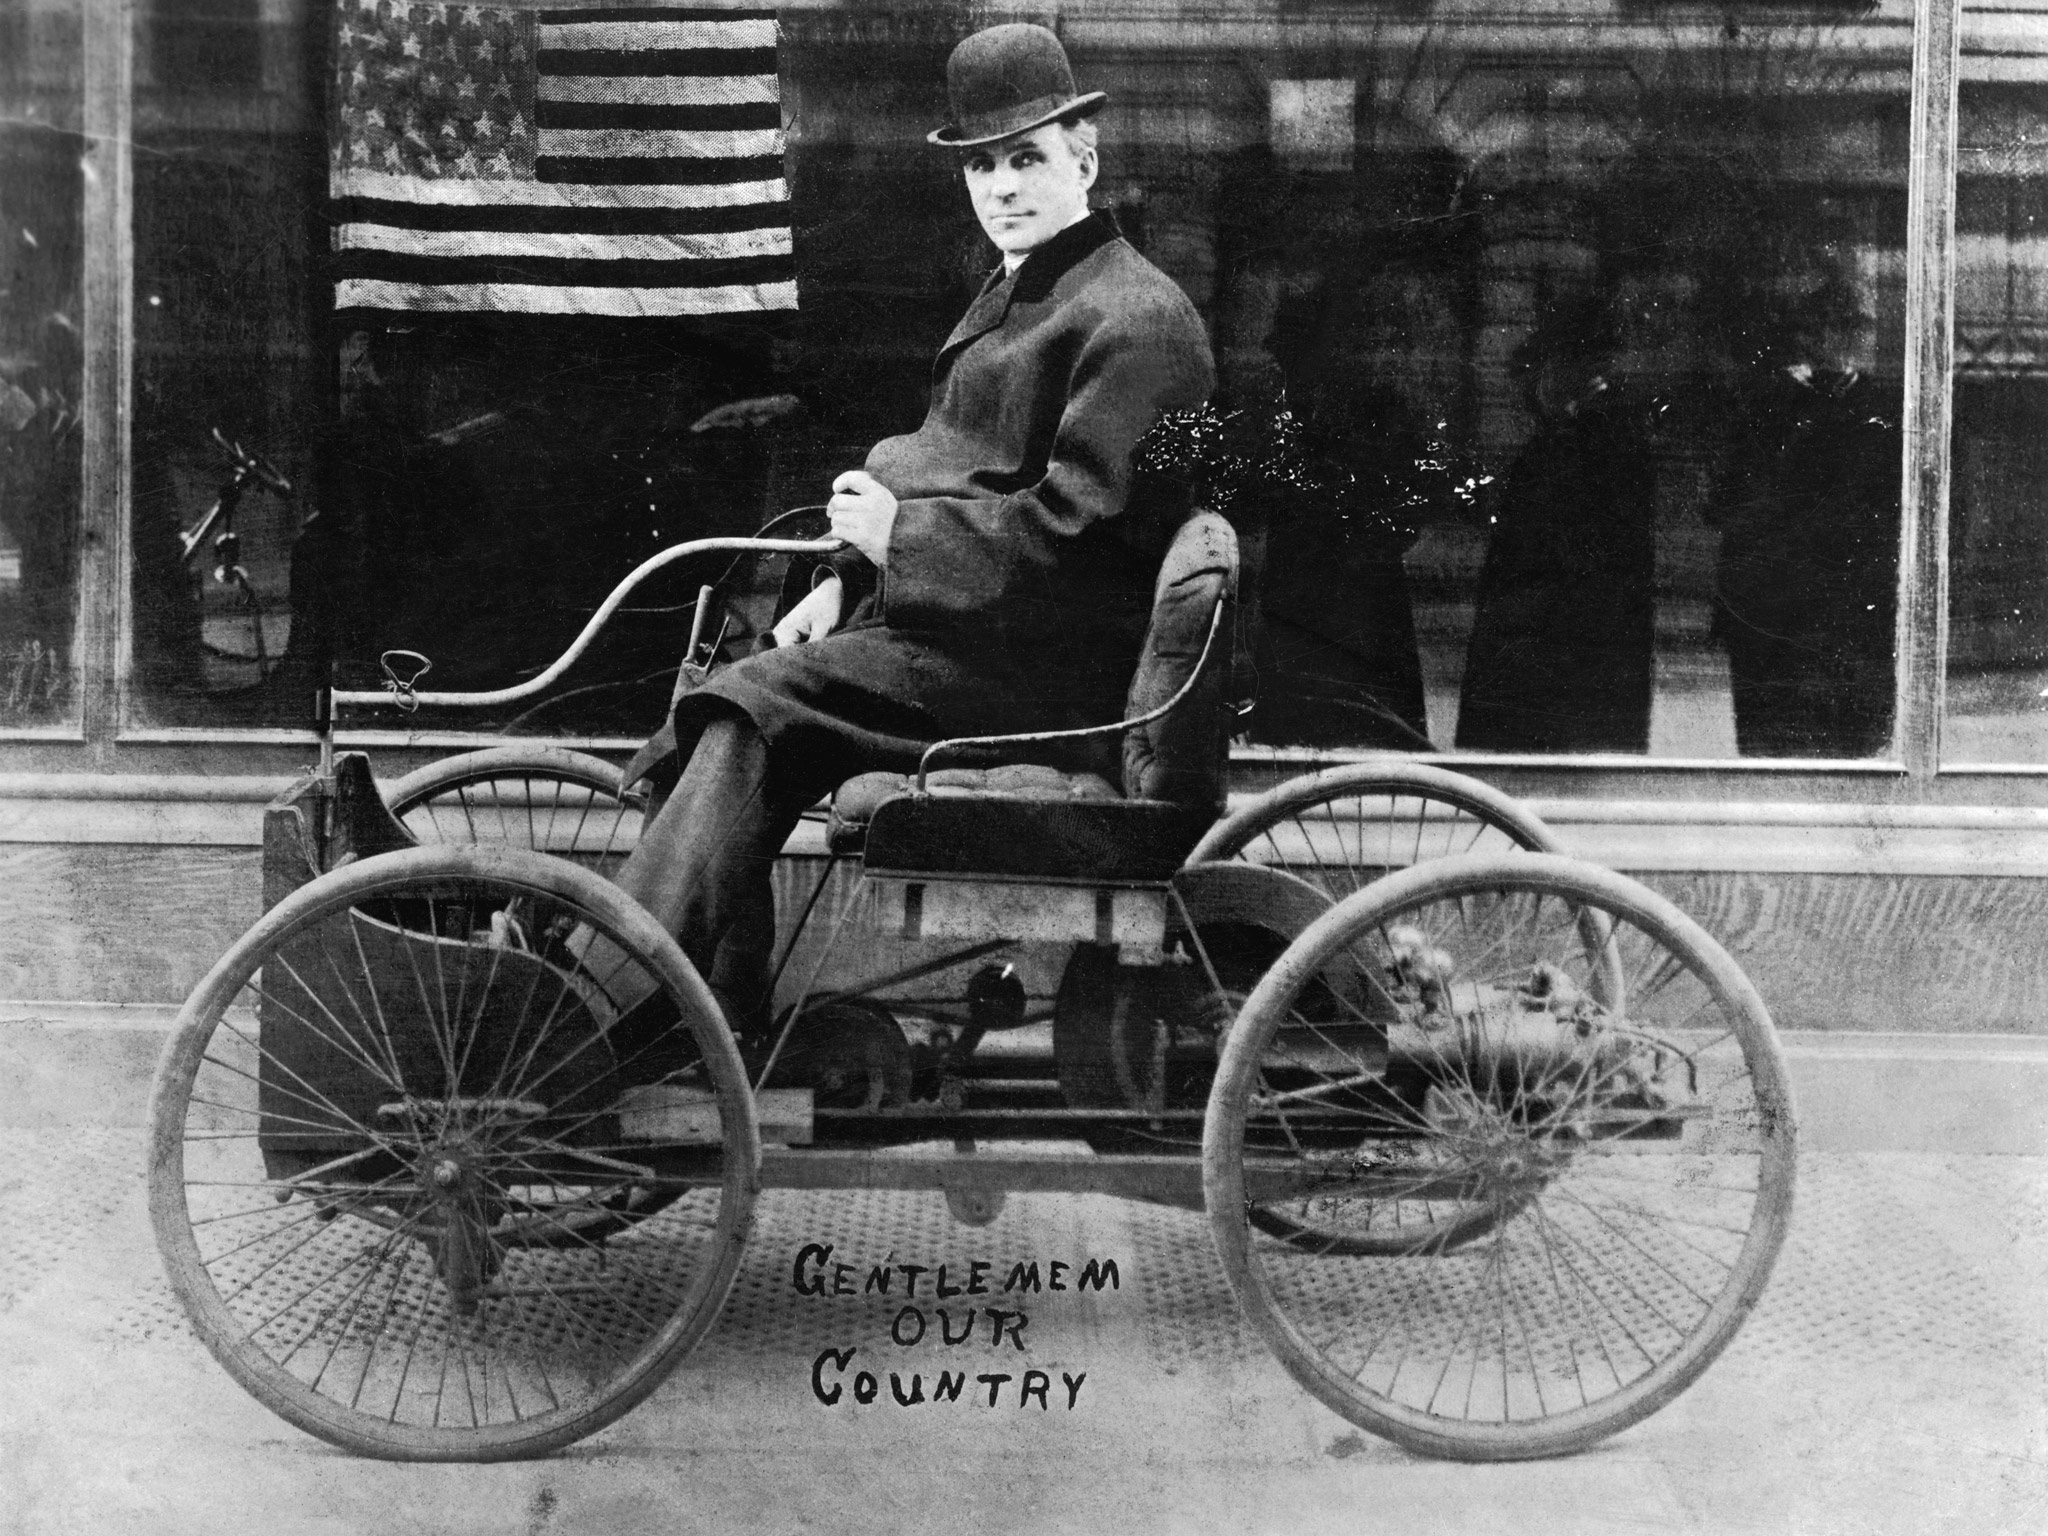 Henry Ford in his first car - a picture from the past | Art and design